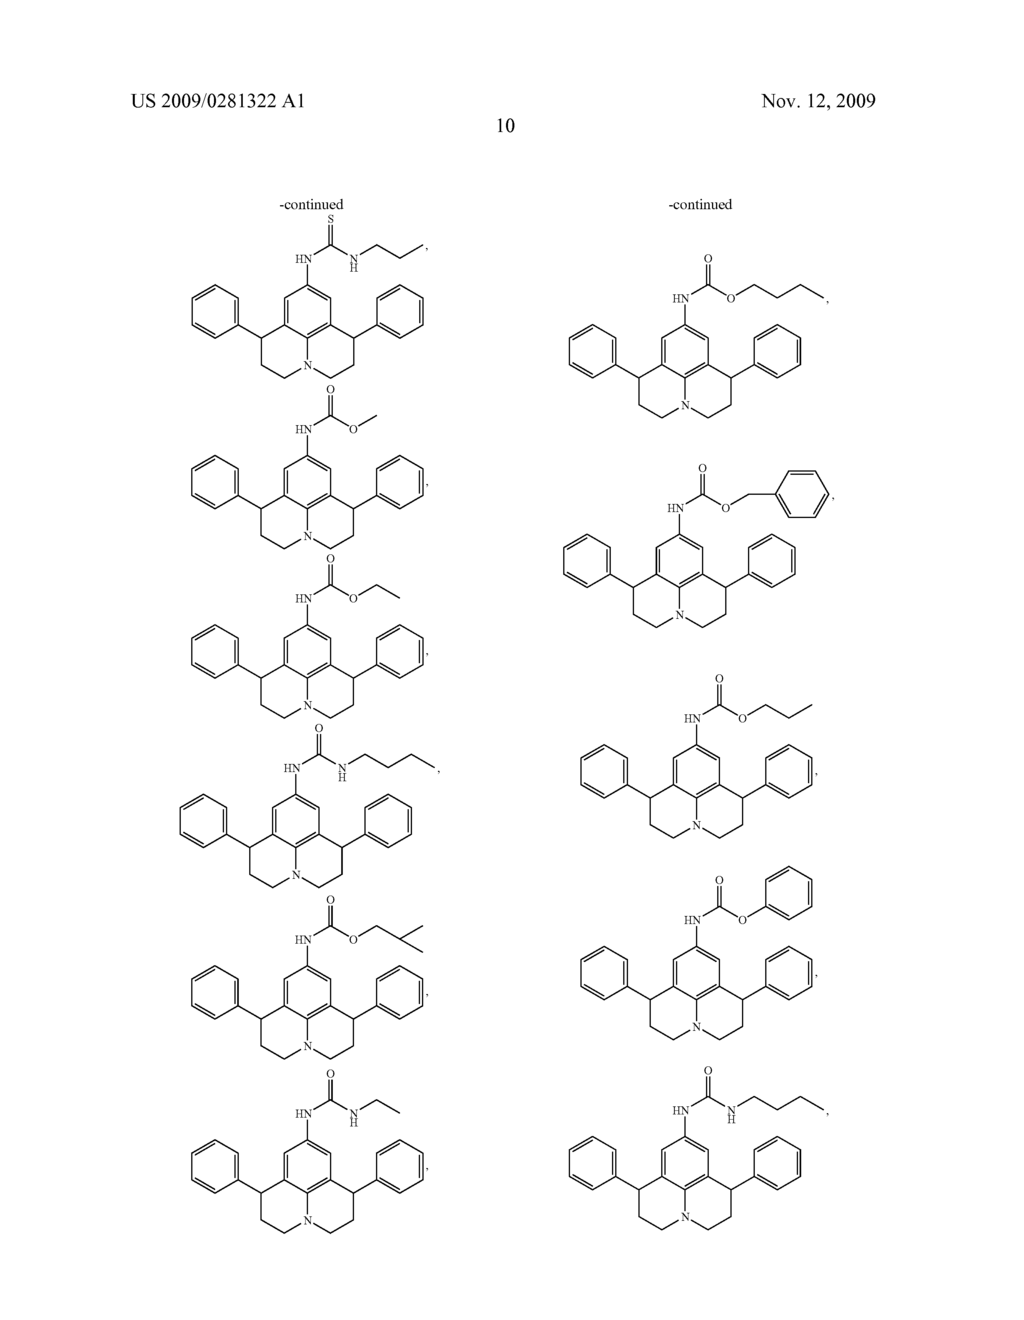 THERAPEUTICALLY USEFUL SUBSTITUTED 1,7-DIPHENYL-1,2,3,5,6,7-HEXAHYDROPYRIDO[3,2,1-Ij]QUINOLINE COMPOUNDS - diagram, schematic, and image 11